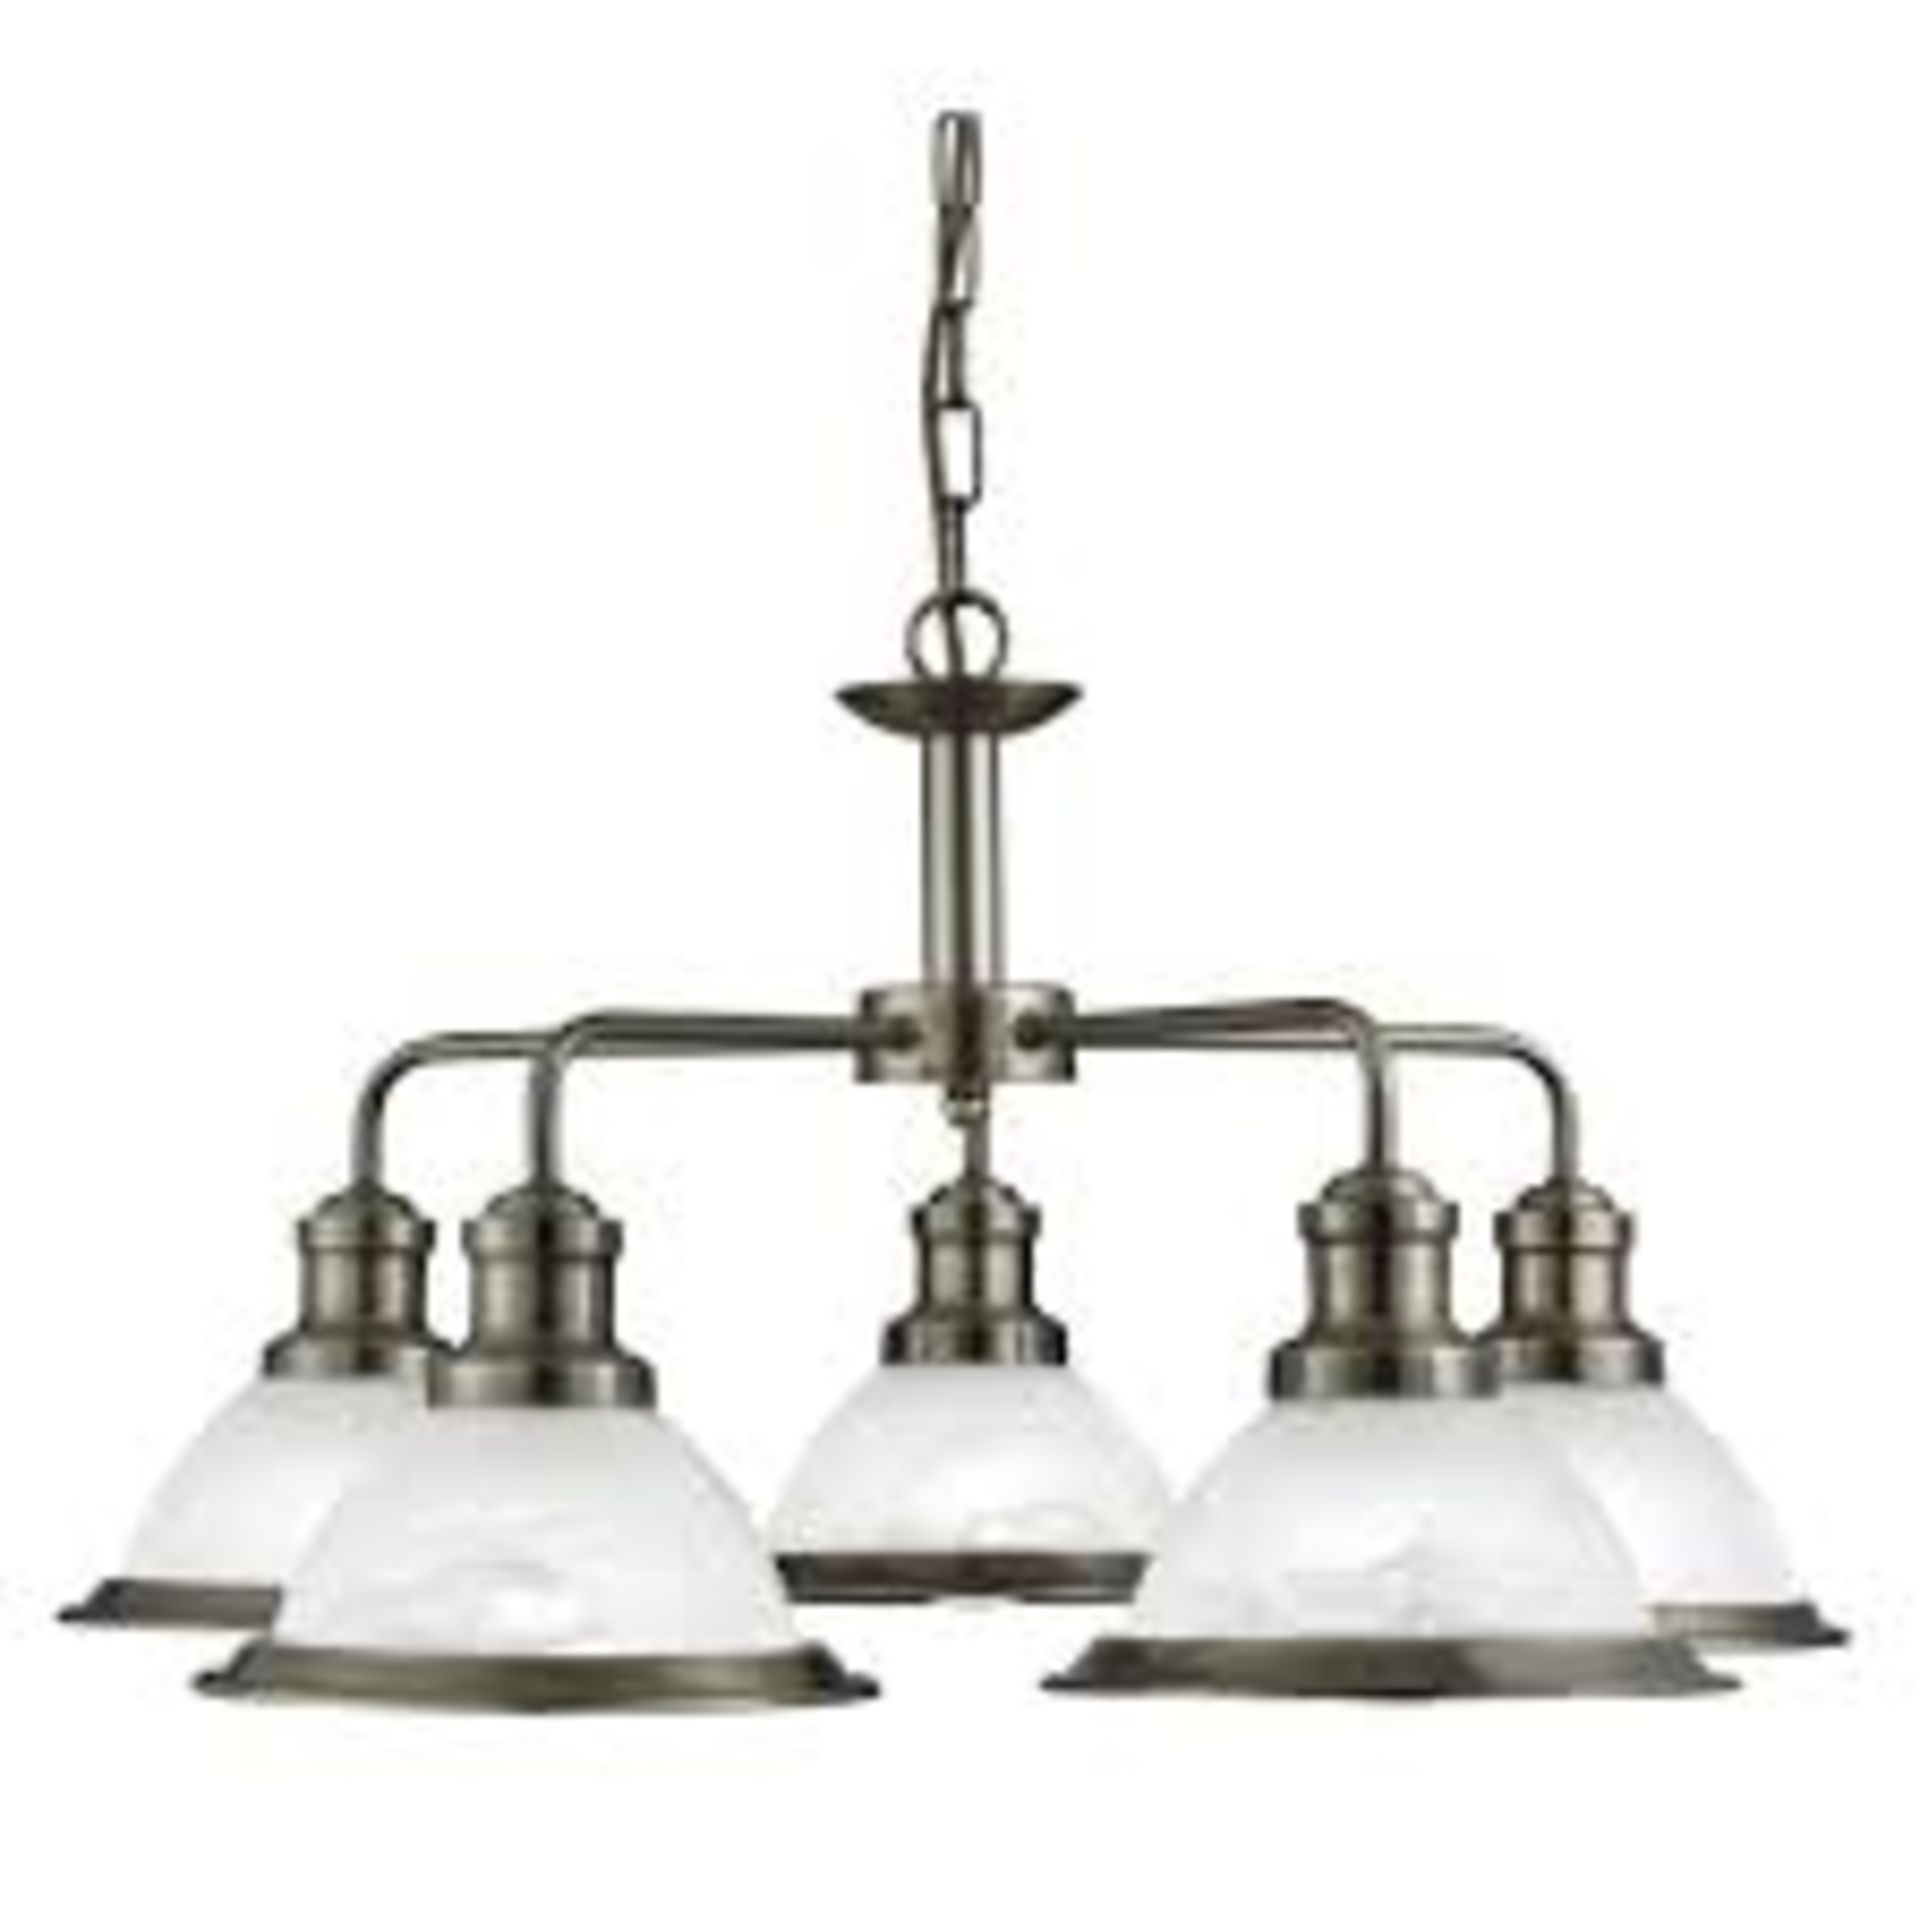 1 x Searchlight Industrial Ceiling Light in Antique Brass - Ref: 1595-5AB -New and Boxed - RRP: £150 - Image 2 of 5